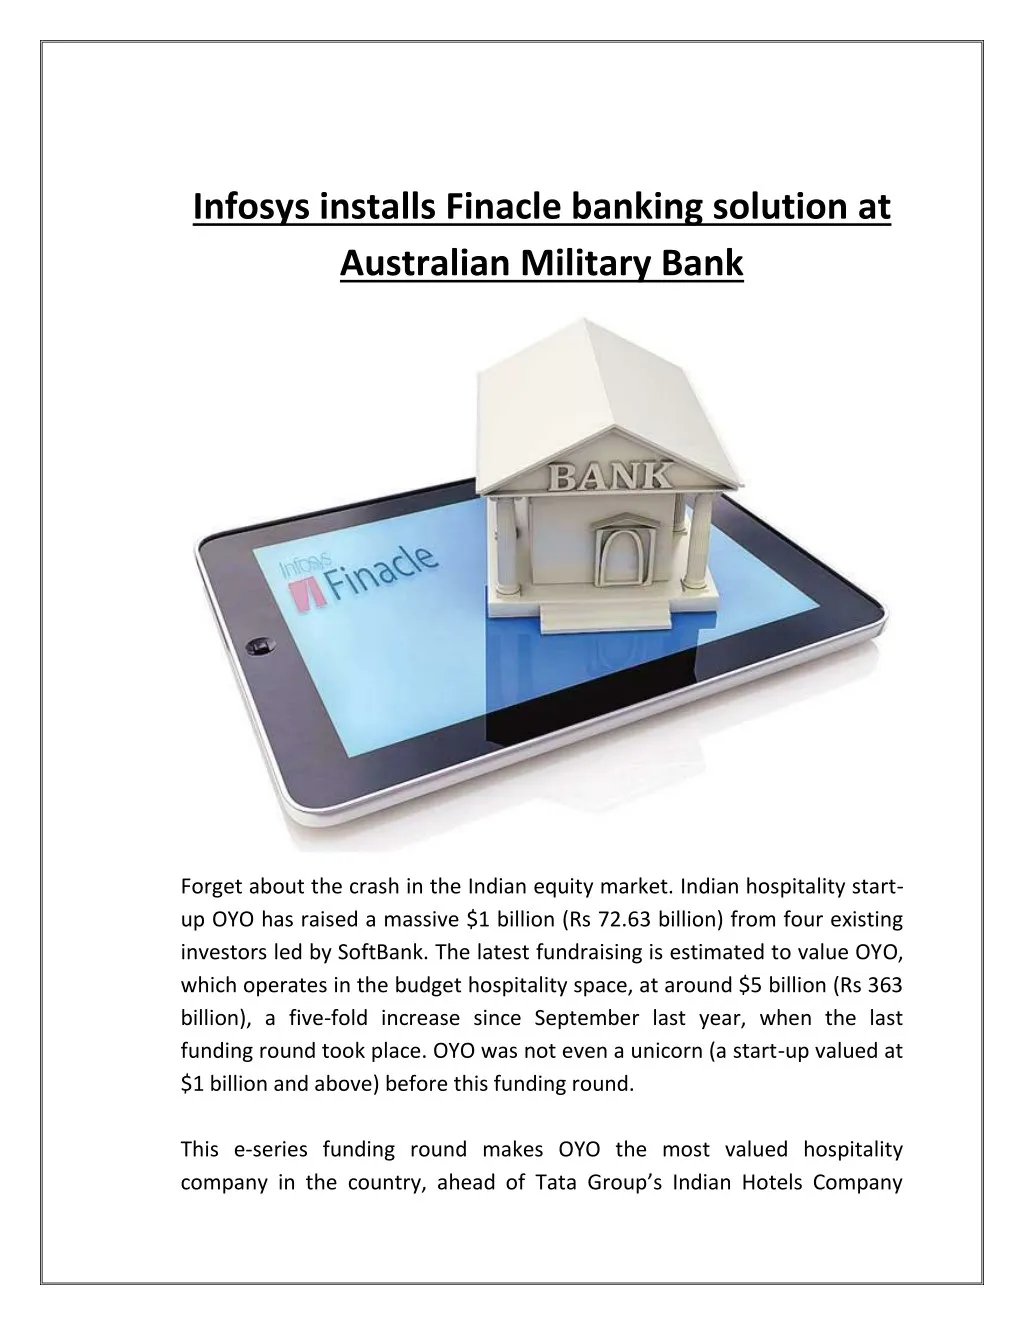 infosys installs finacle banking solution